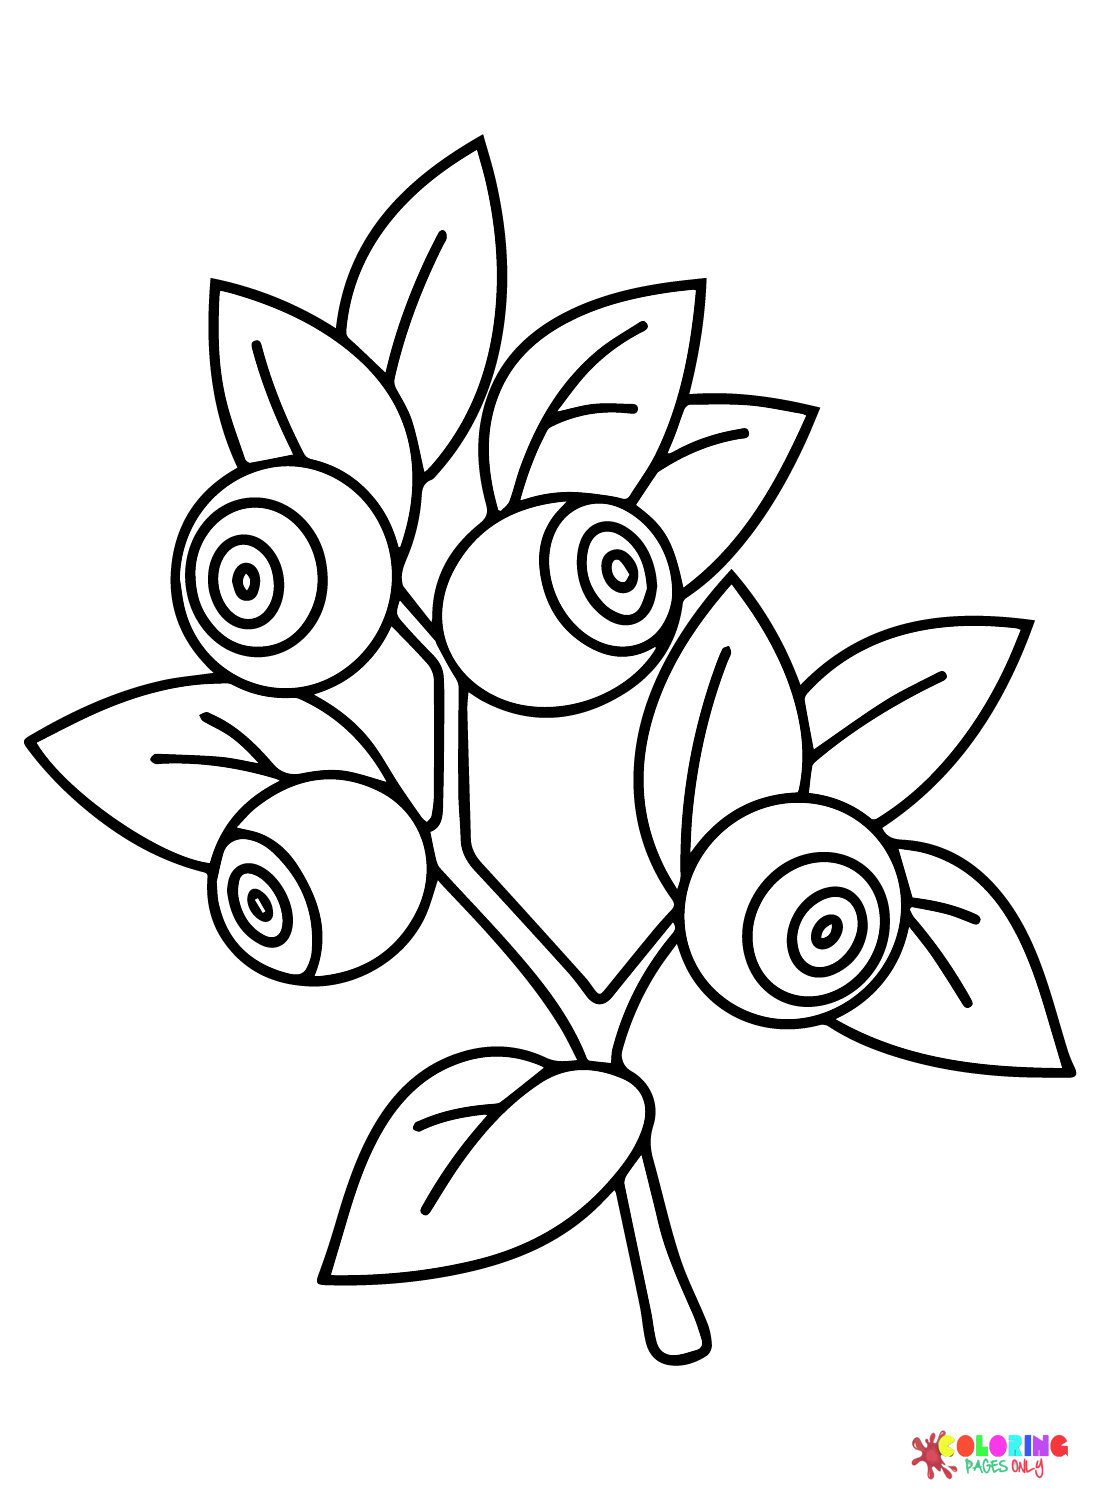 Blueberry Free Coloring Page